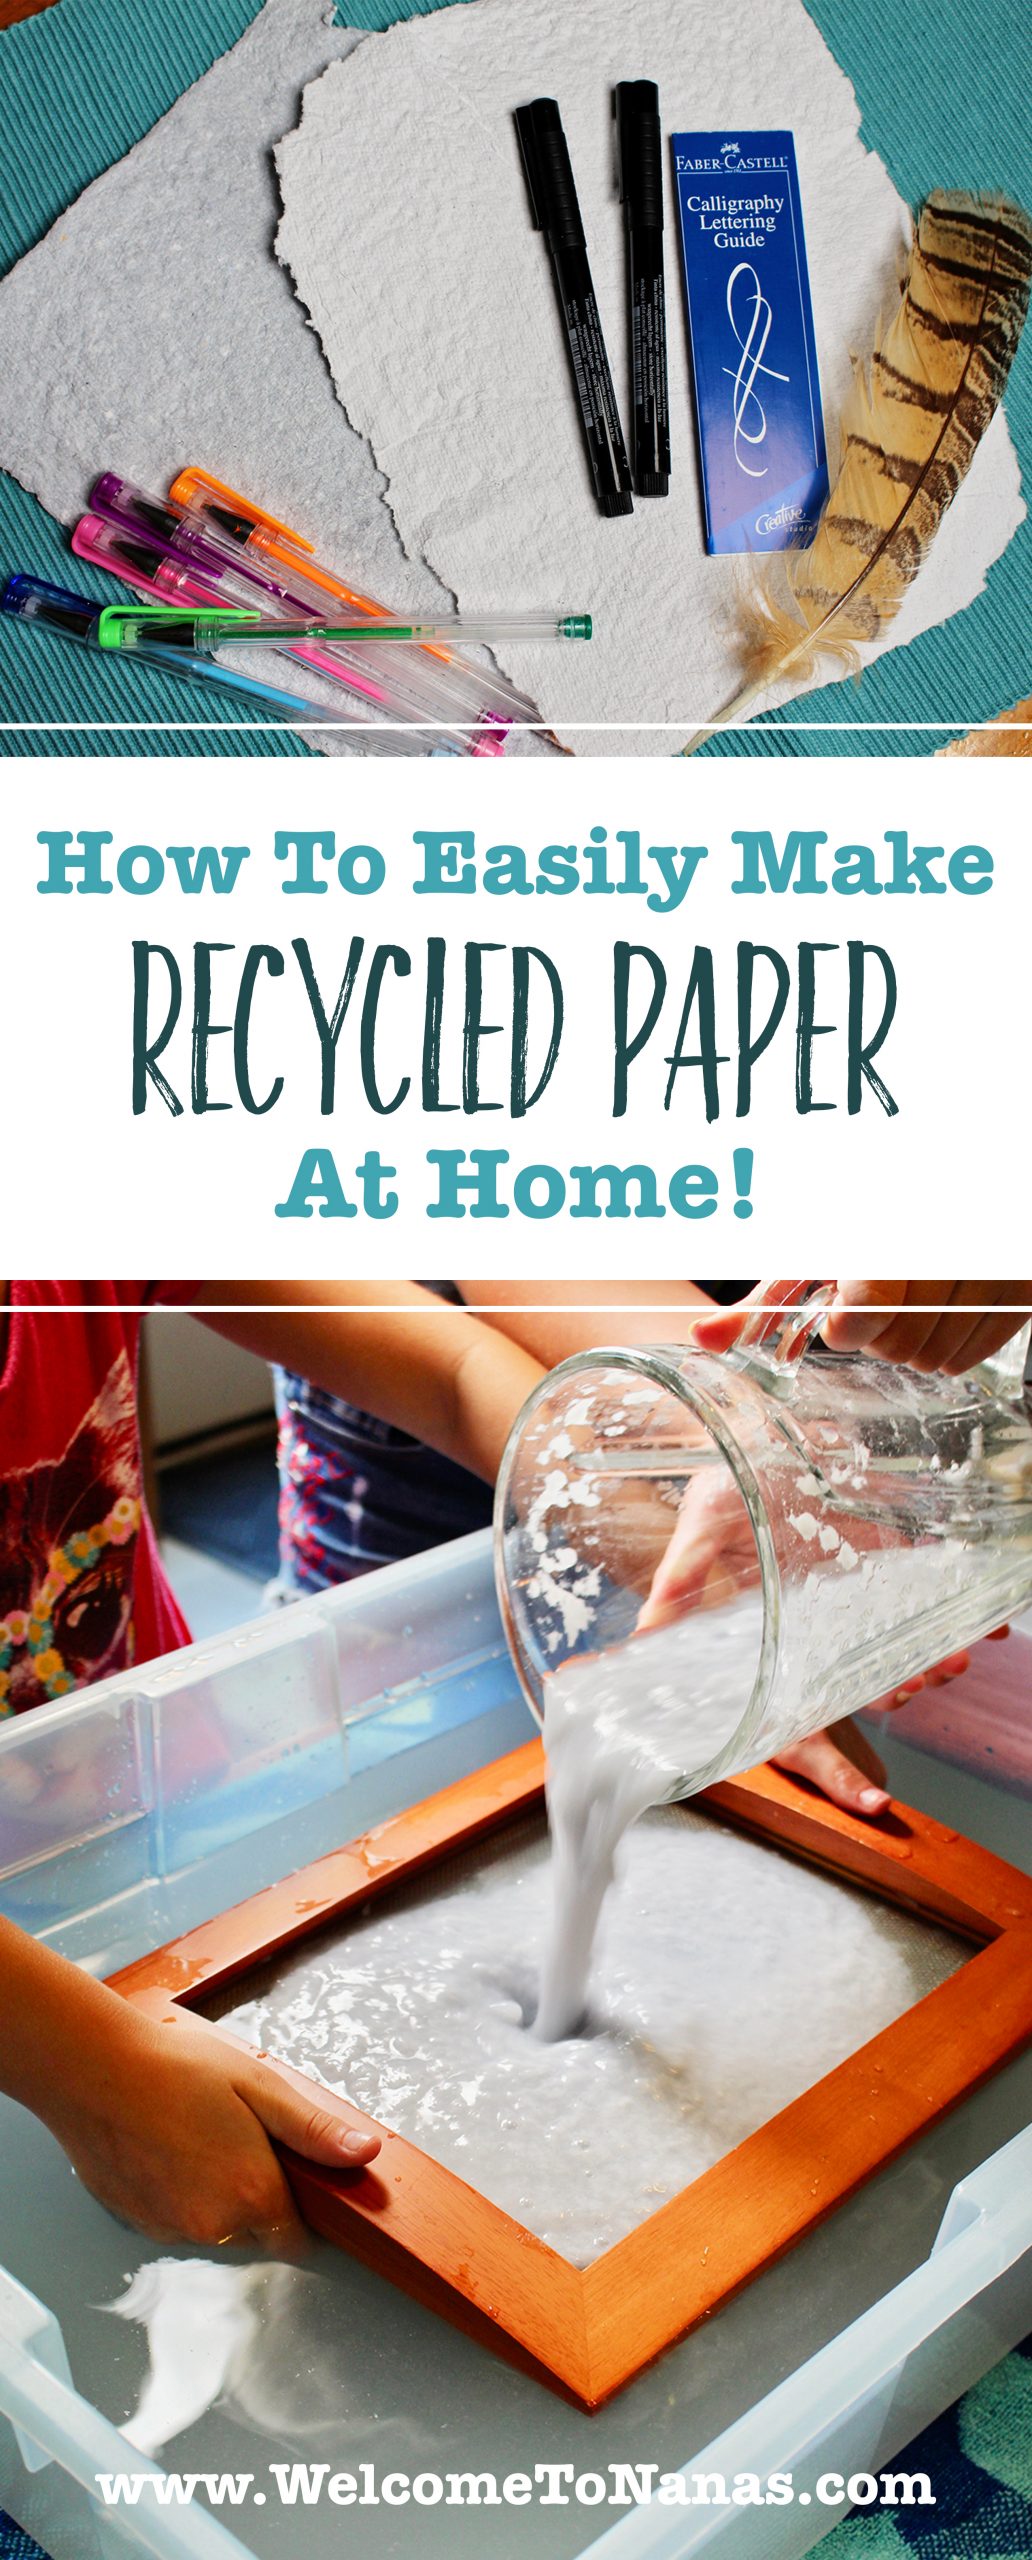 Making recycled paper at home.